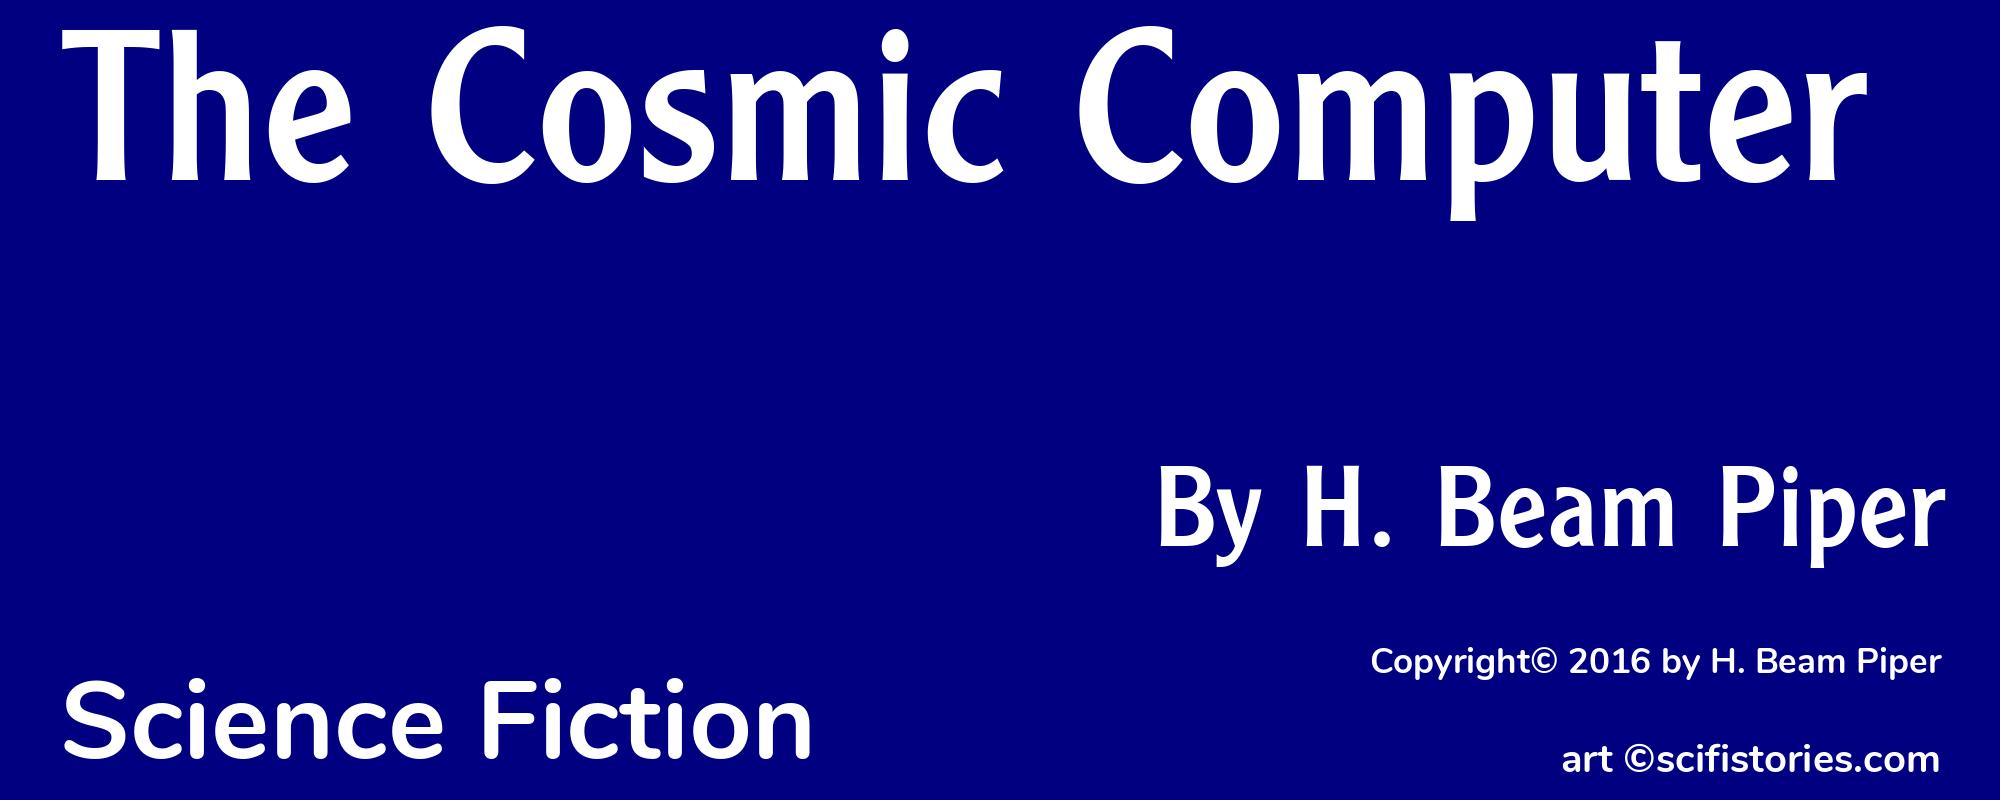 The Cosmic Computer - Cover